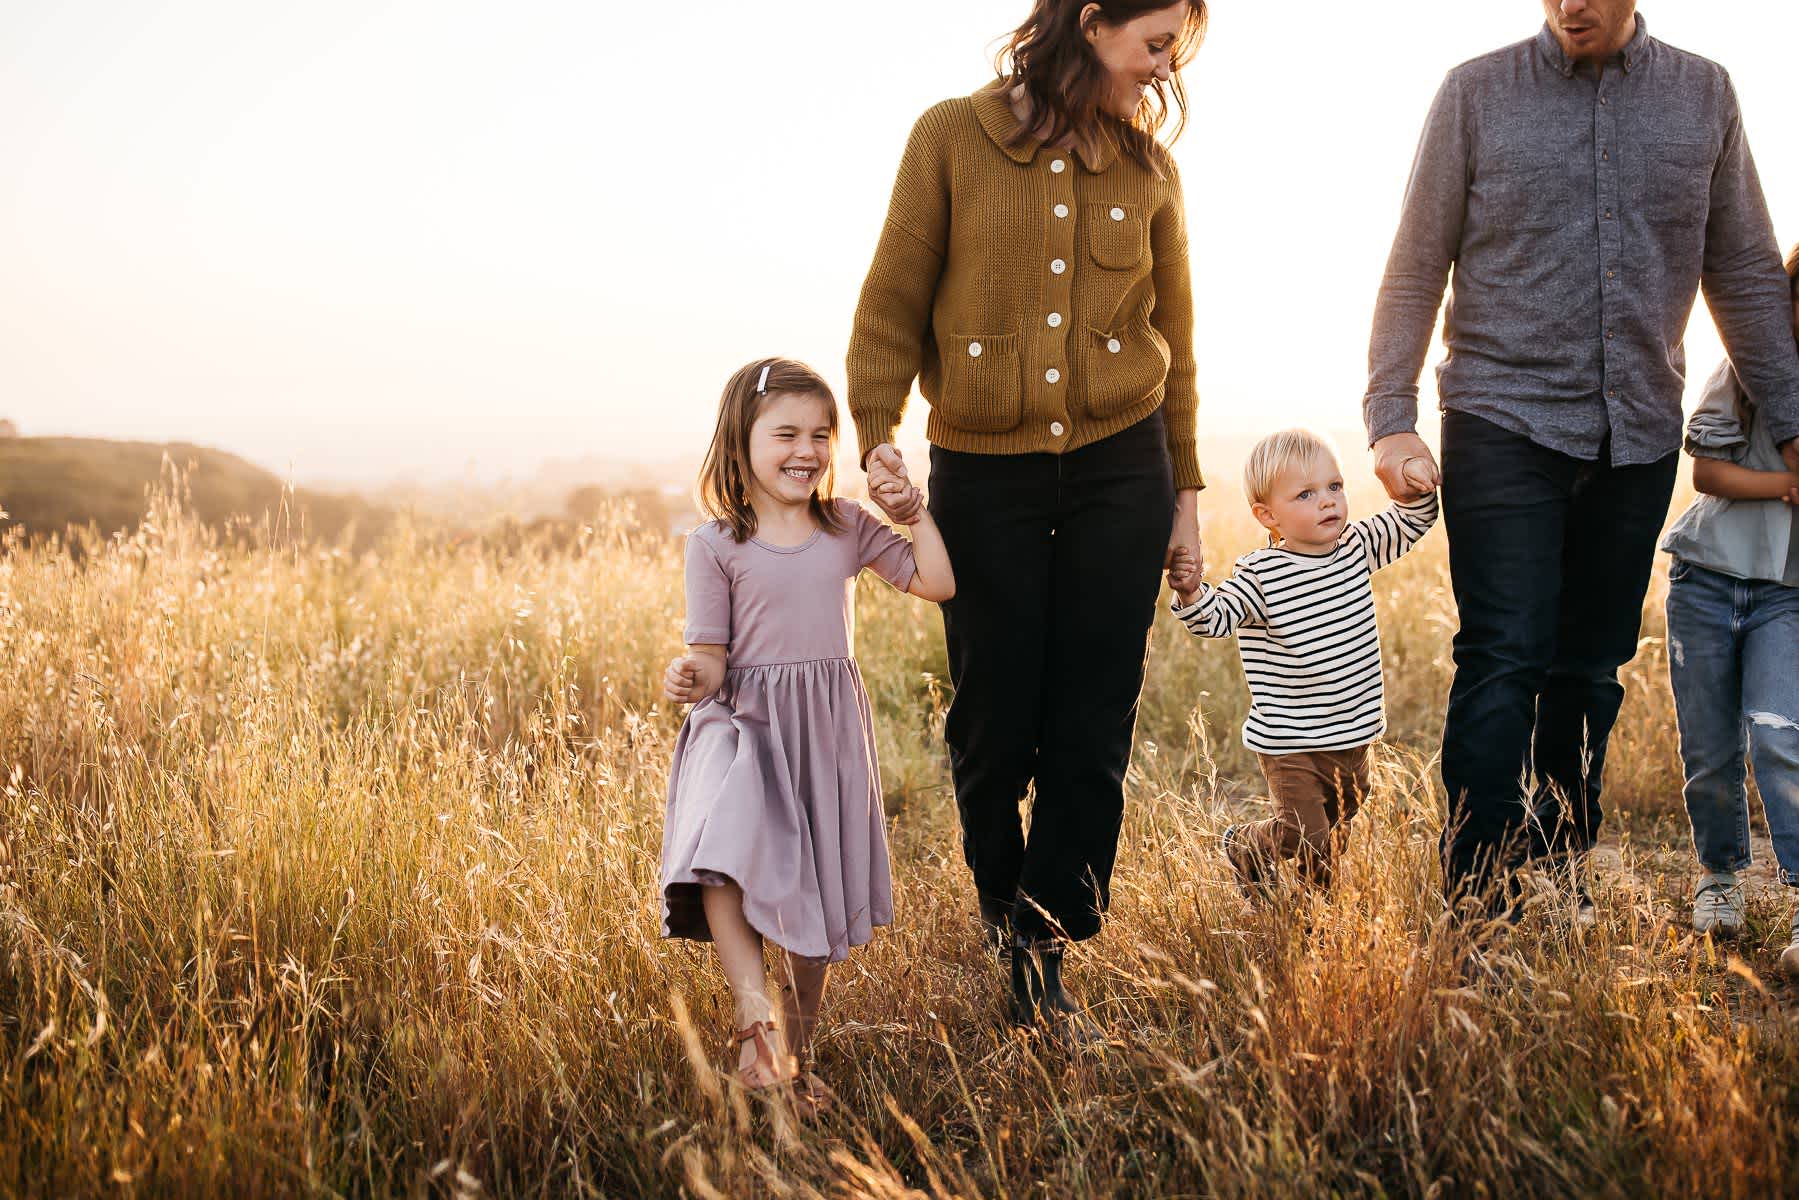 oakland-hills-golden-hour-lifestyle-family-session-23